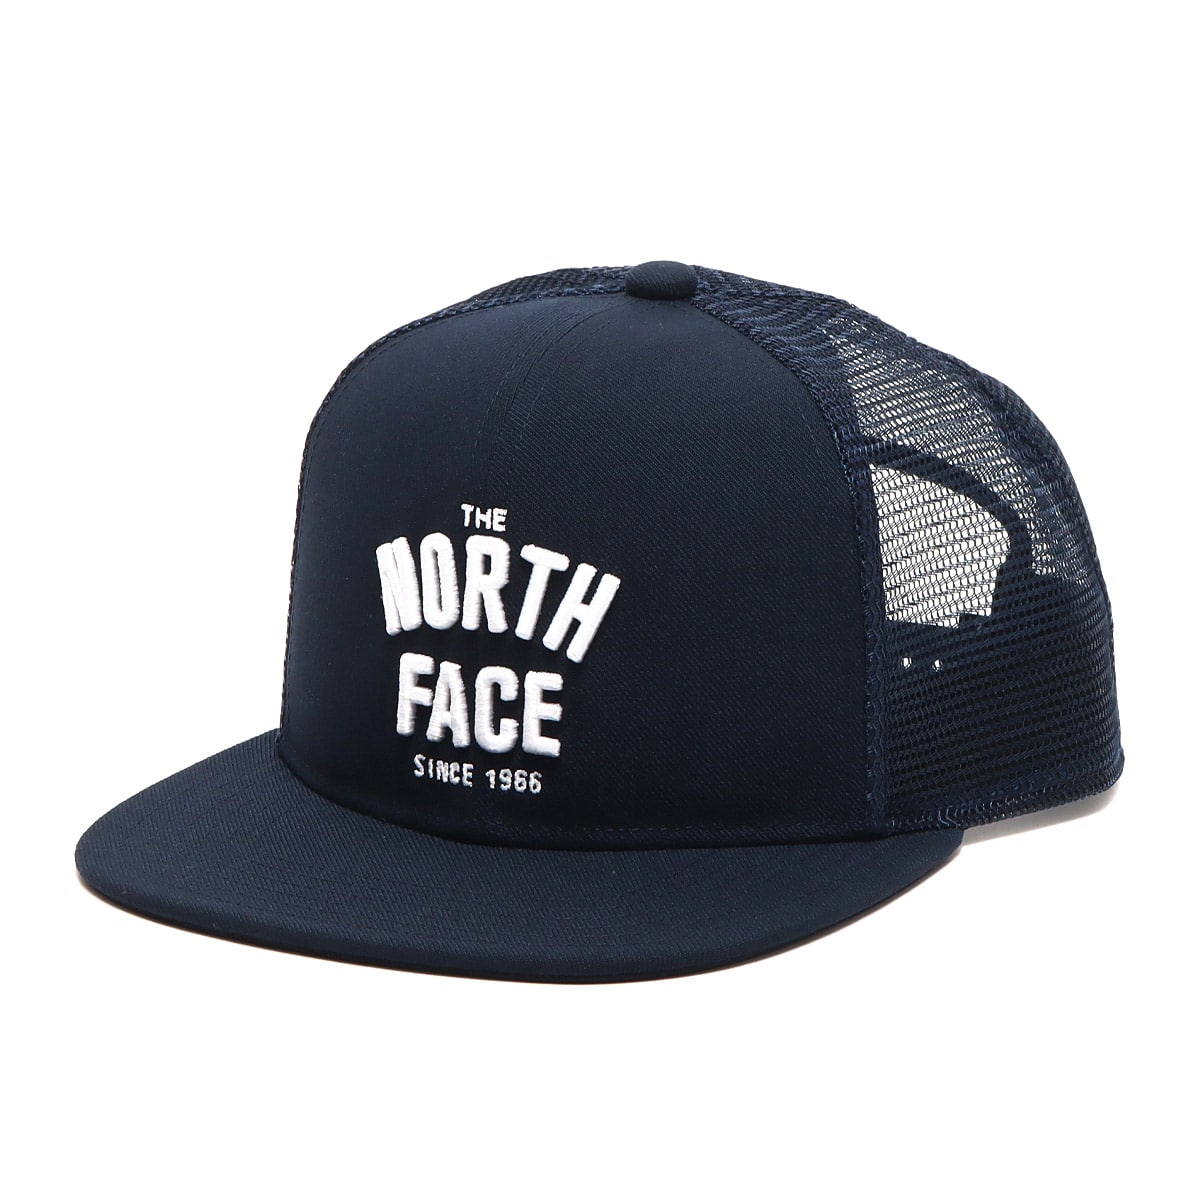 THE NORTH FACE MESSAGE MESH CAP アーバンネイビー 23SS-I